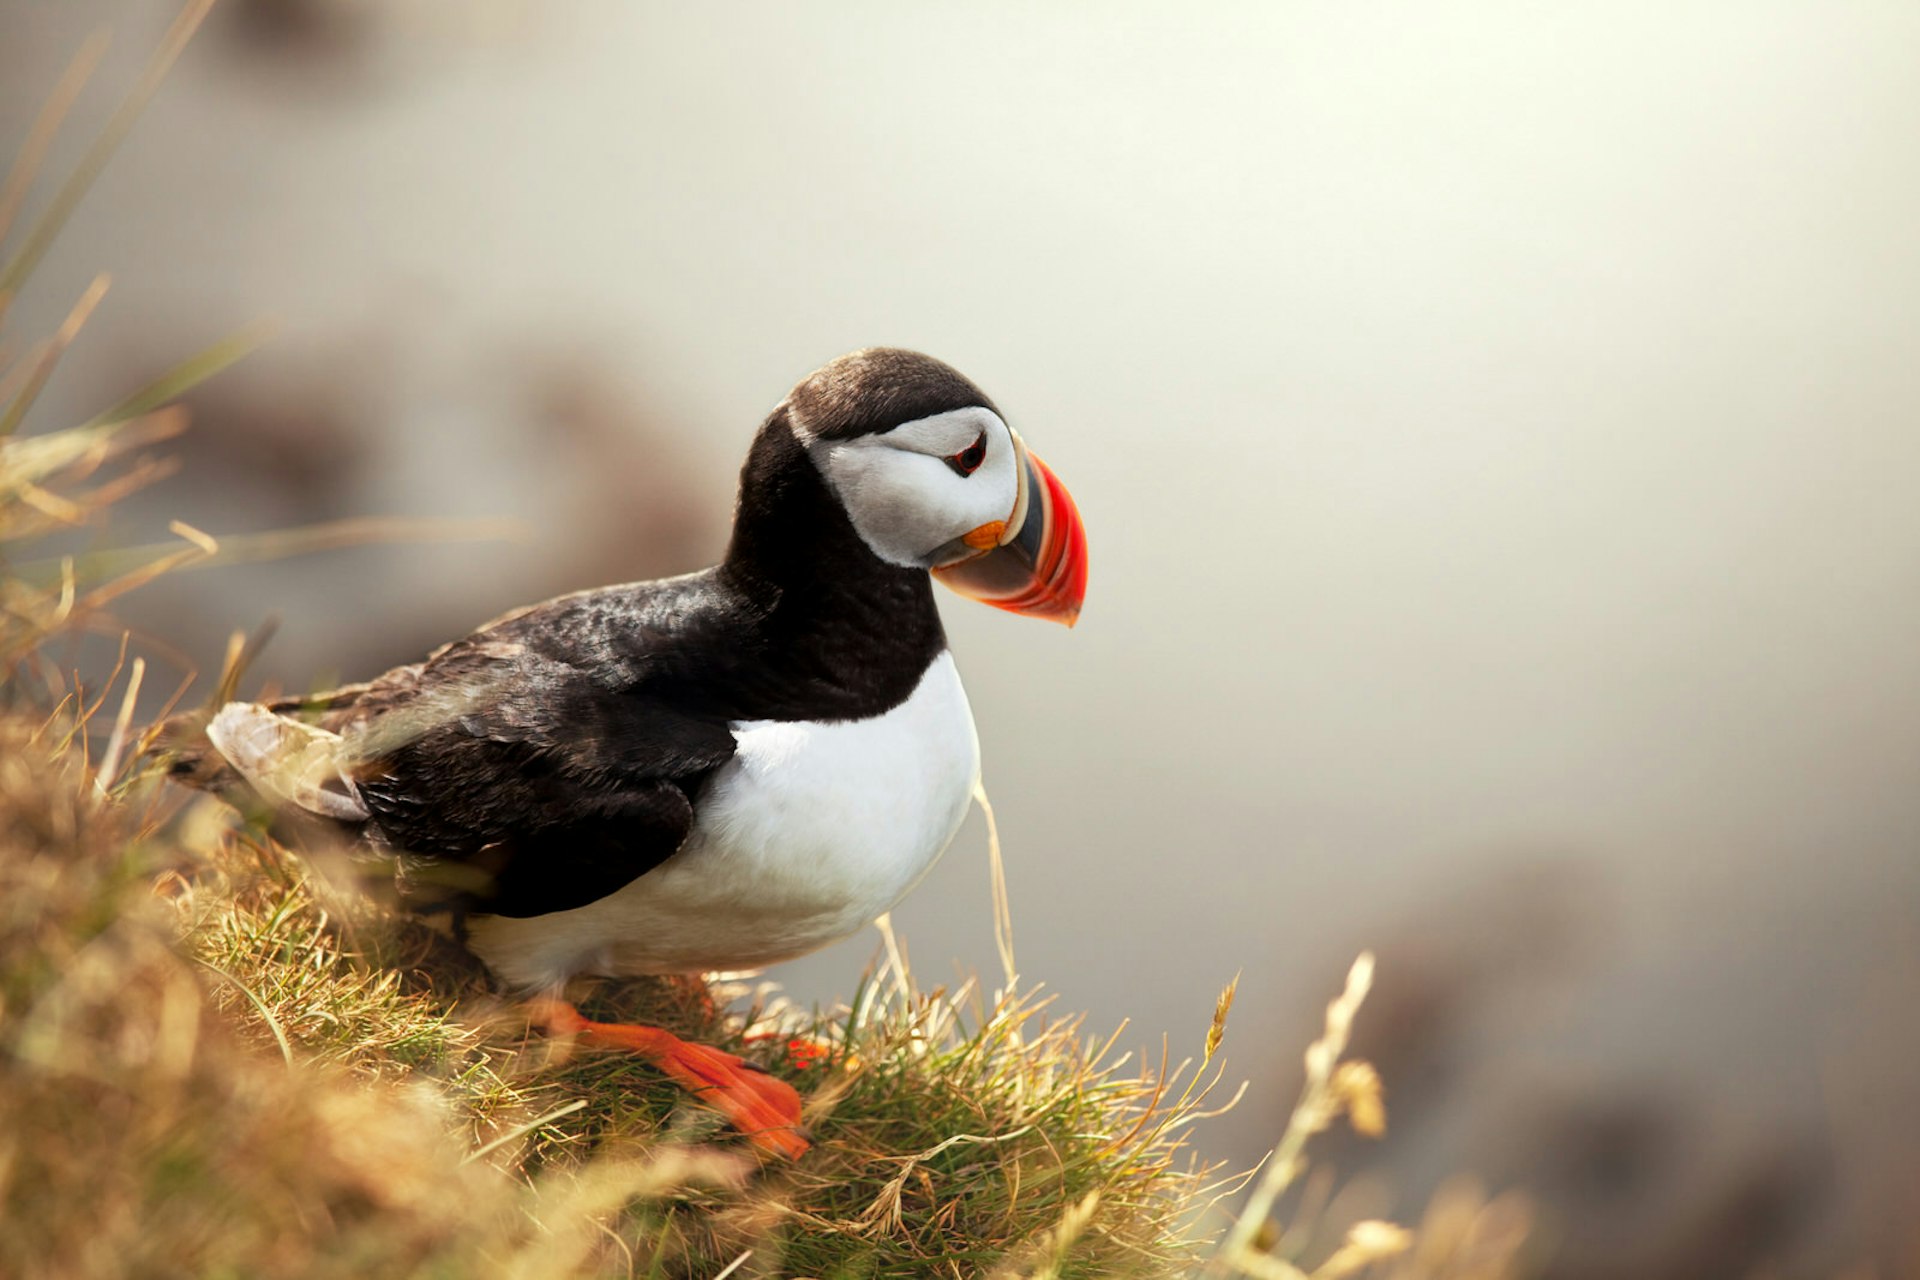 A puffin on Skellig Michael © Galyna Andrushko / Shutterstock